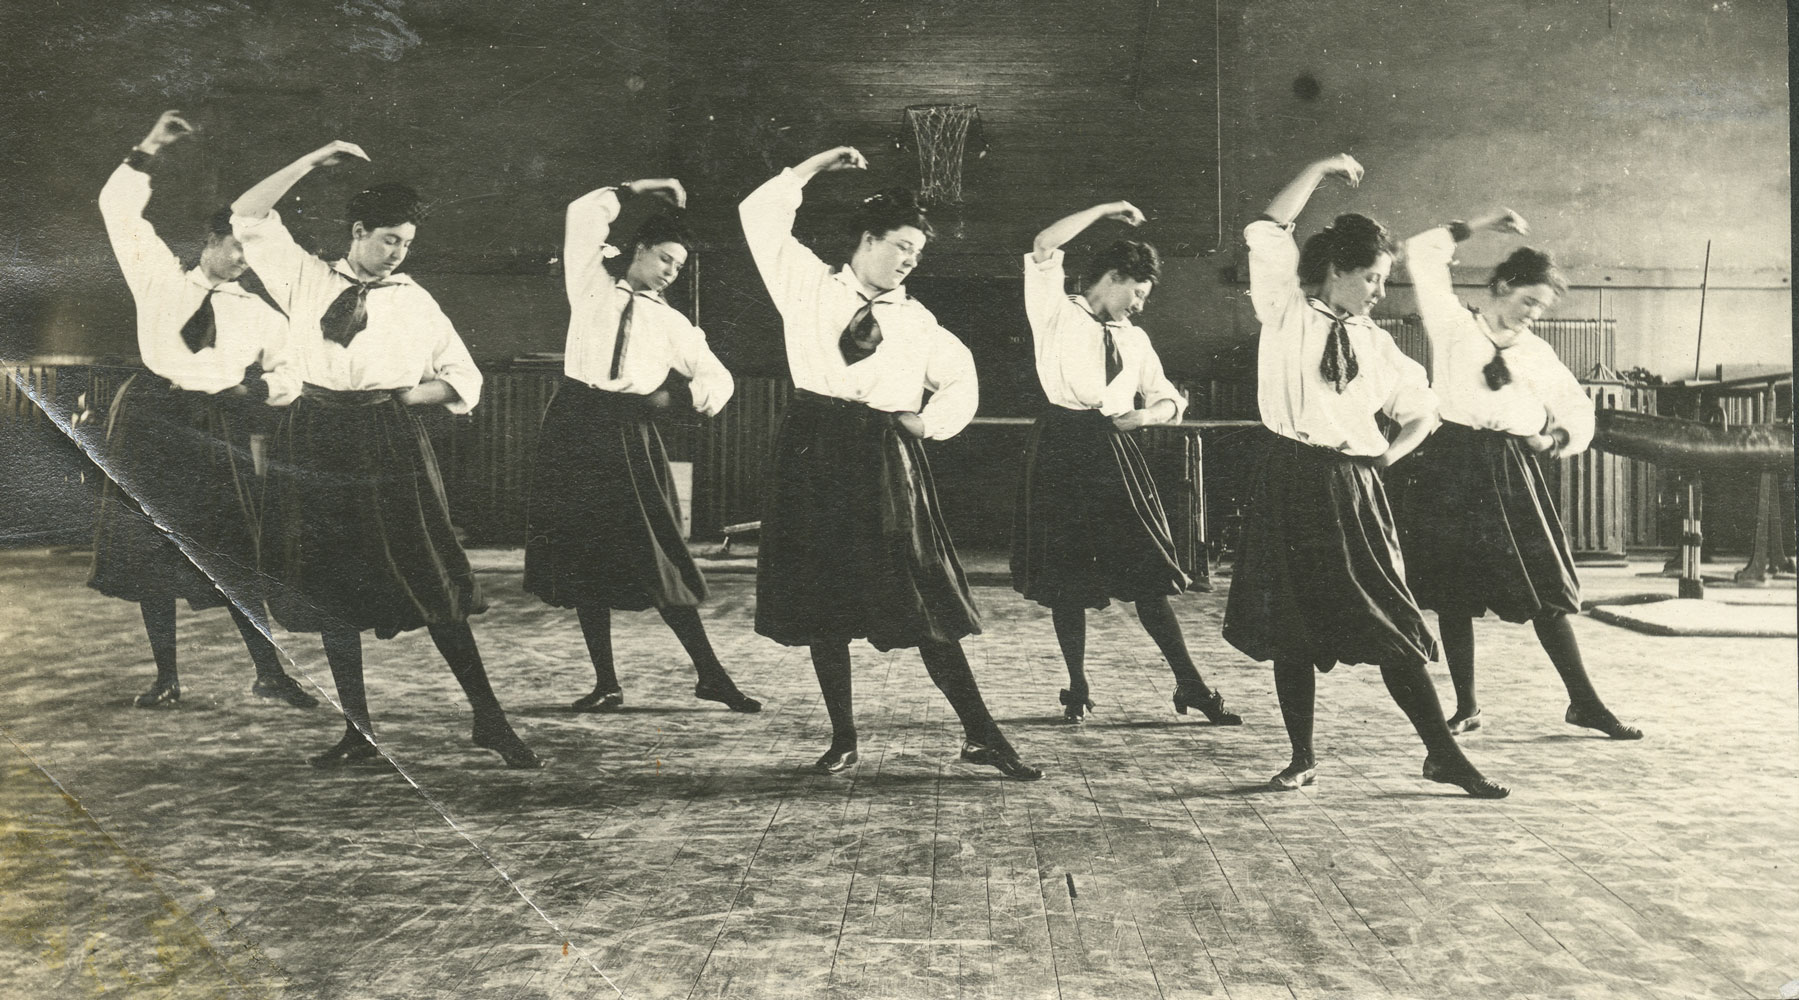 A black and white image of women in skirts stretching